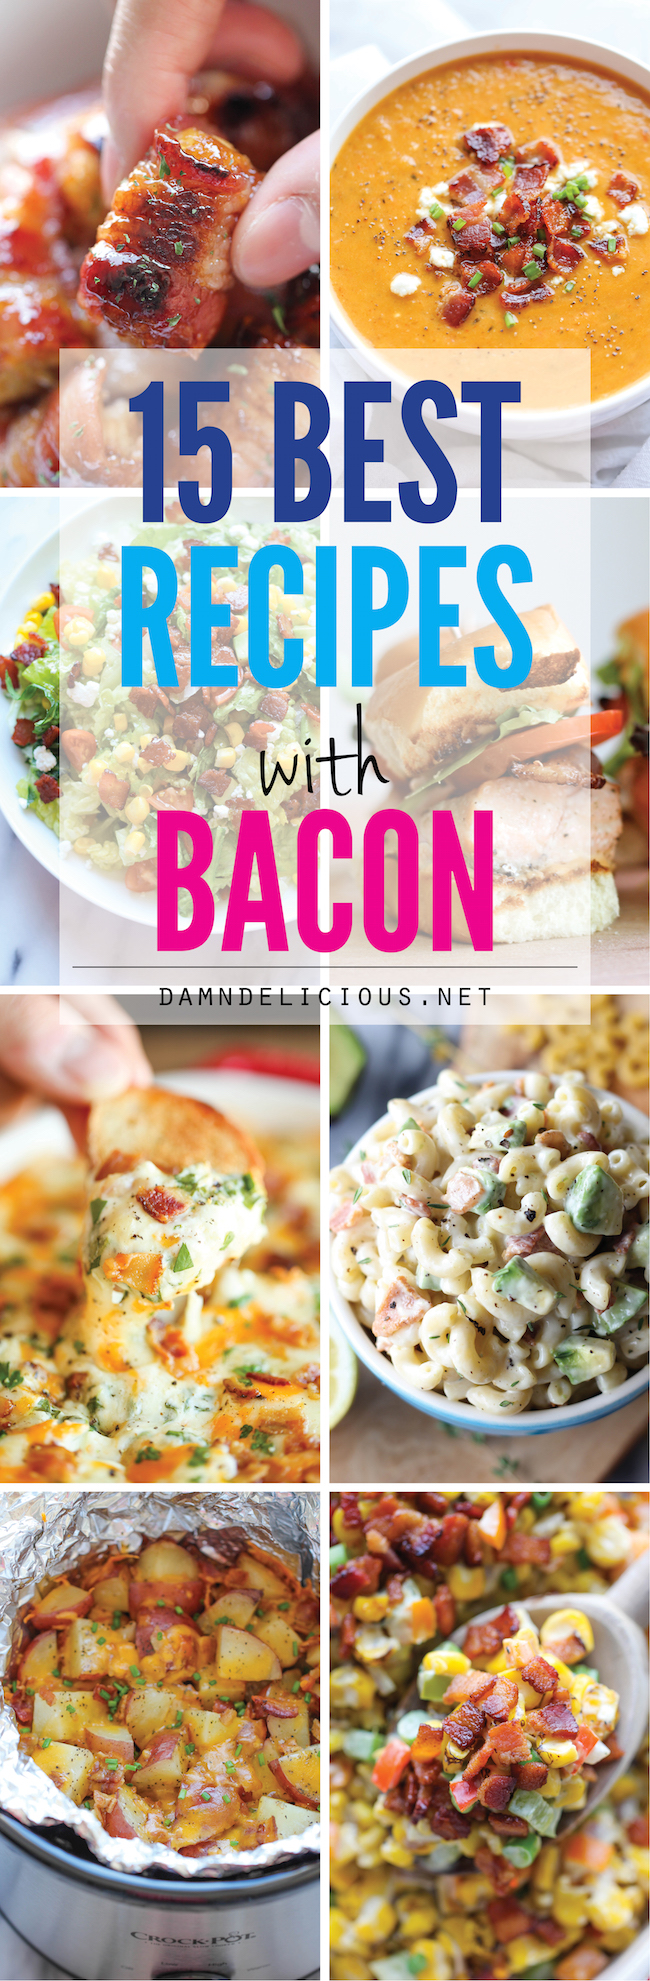 15 Best Recipes with Bacon - From appetizers to salads to soups, you can never have too much bacon!